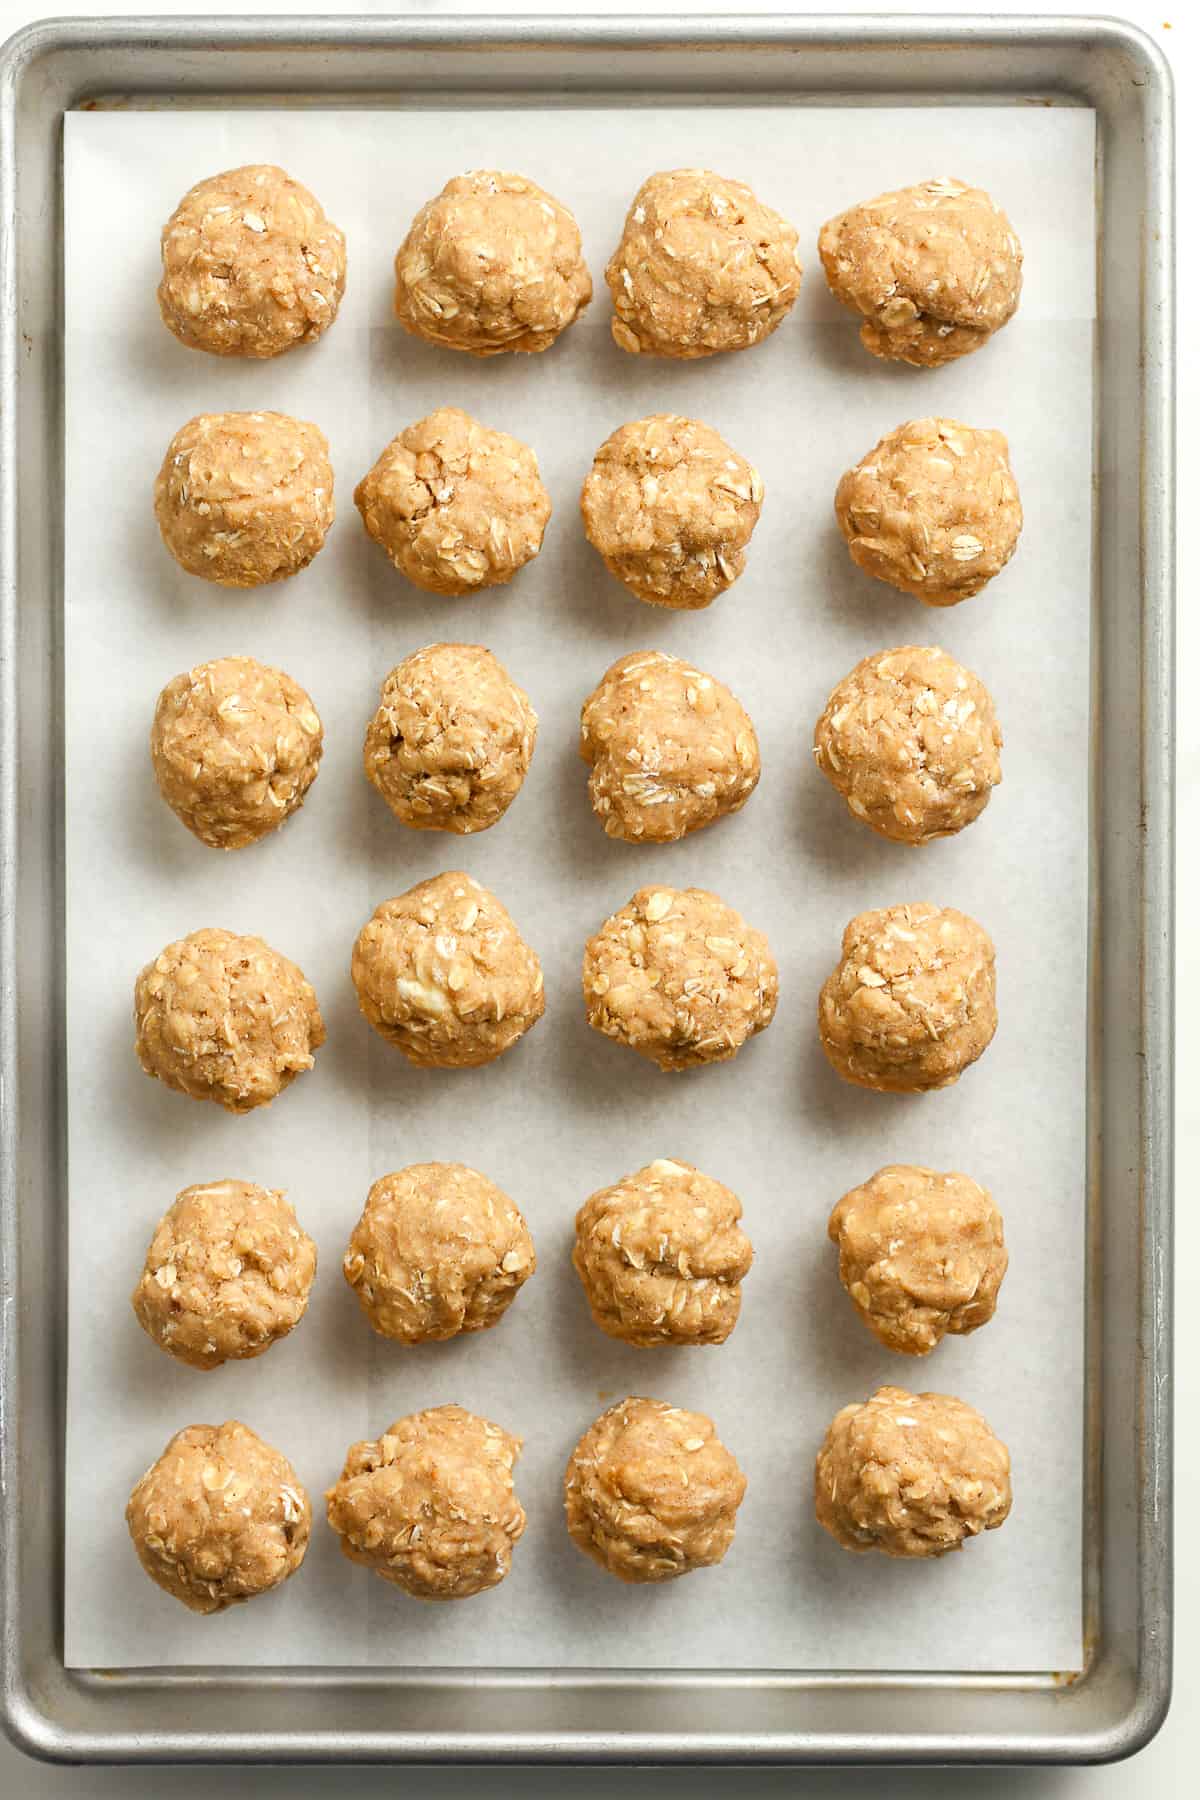 A sheet pan of the oatmeal cookie balls.